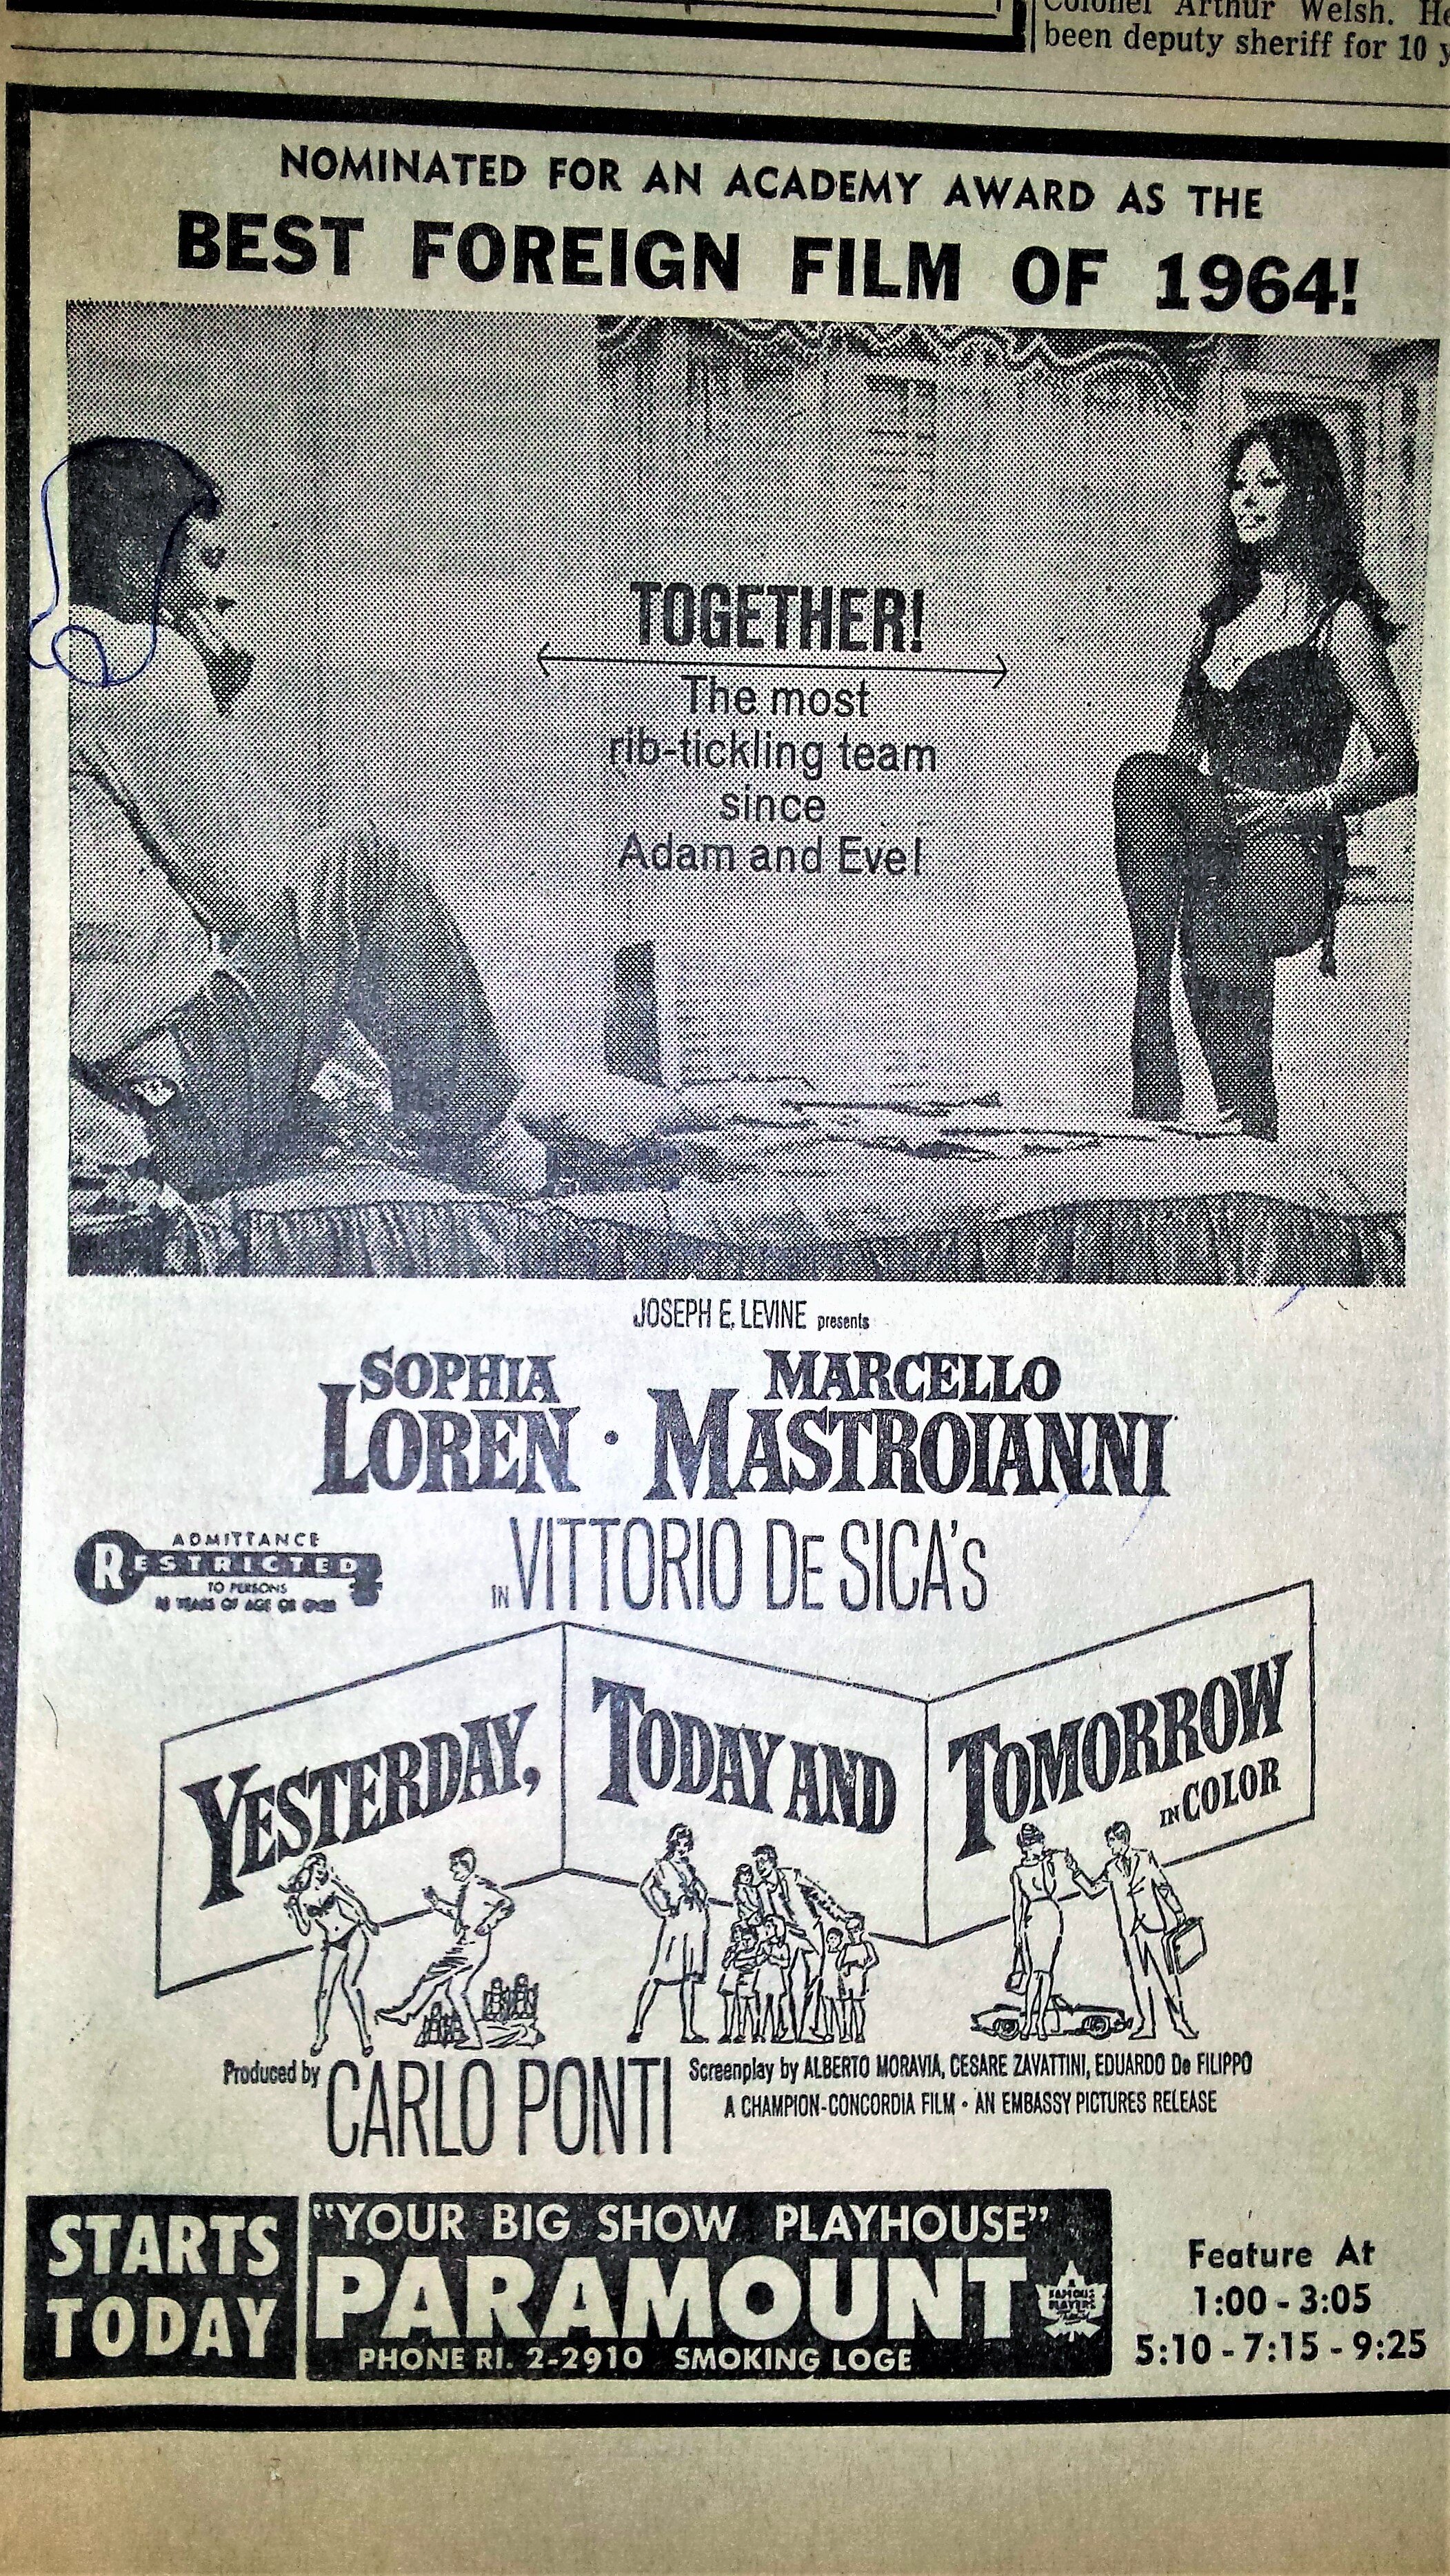 1965 March 26 p24 Paramount Yesterday Today Tomorrow 2 (2).jpg